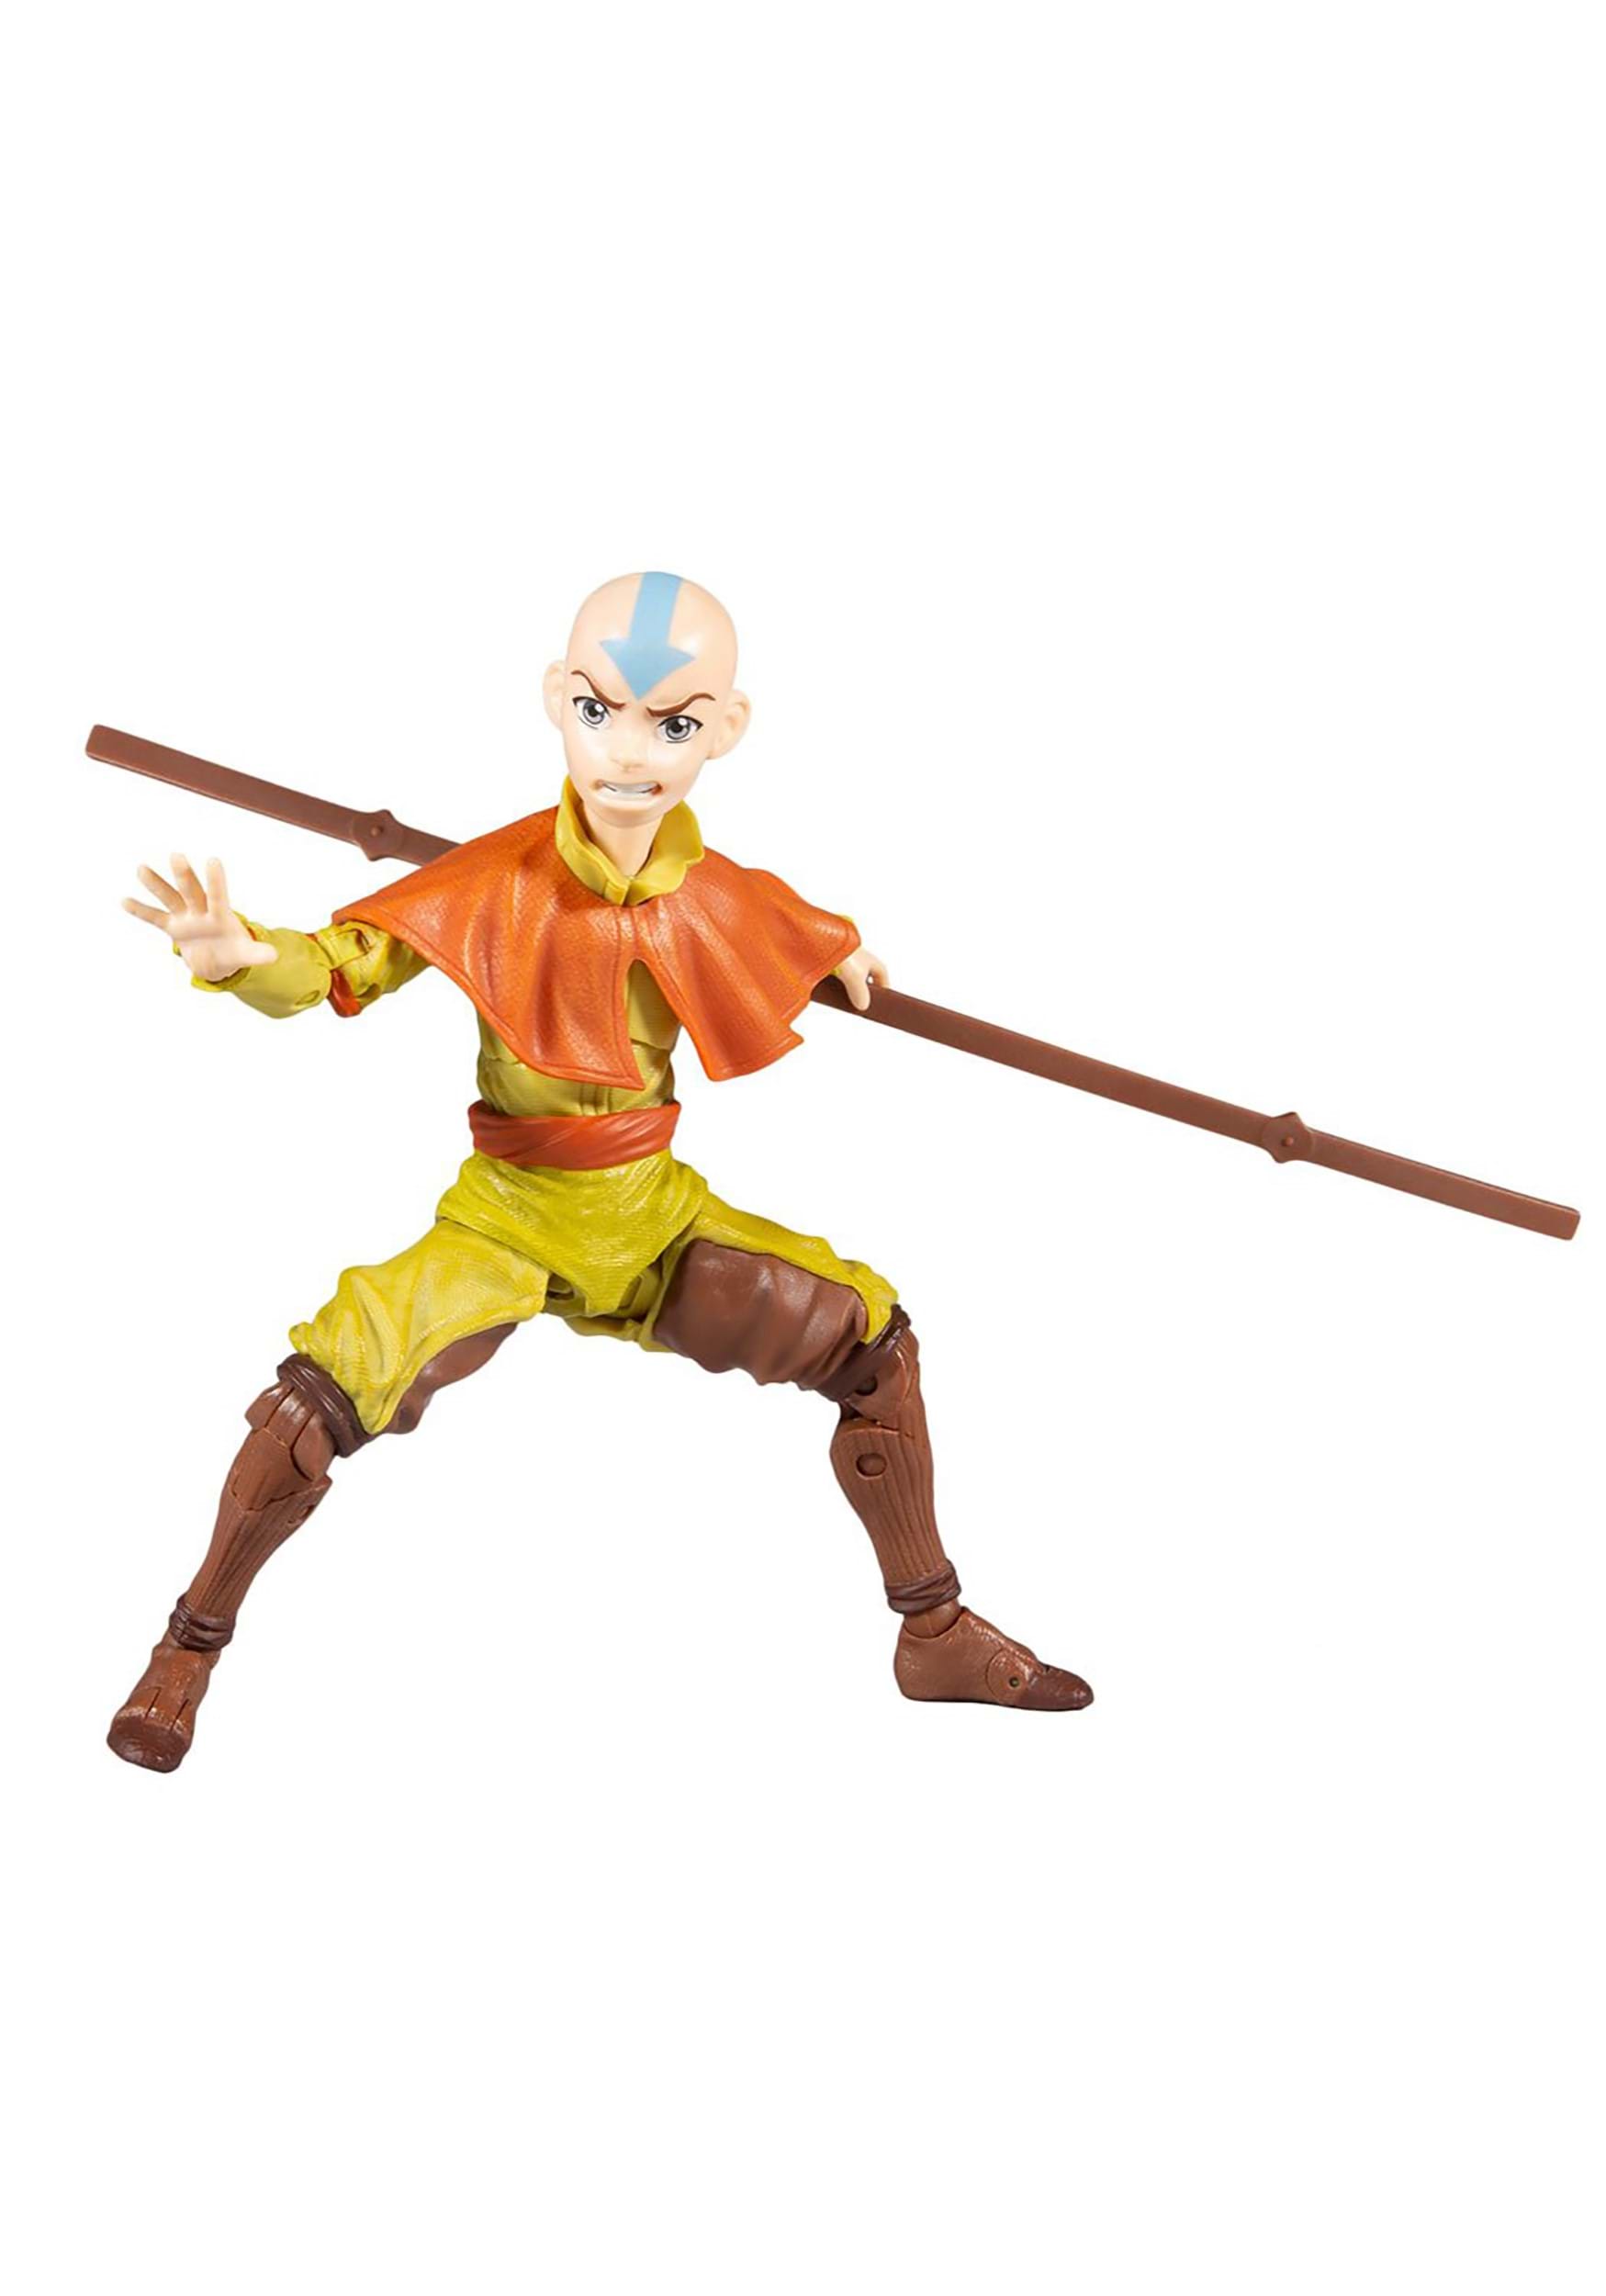 7-Inch Avatar: The Last Airbender Wave 1 Aang Action Figure